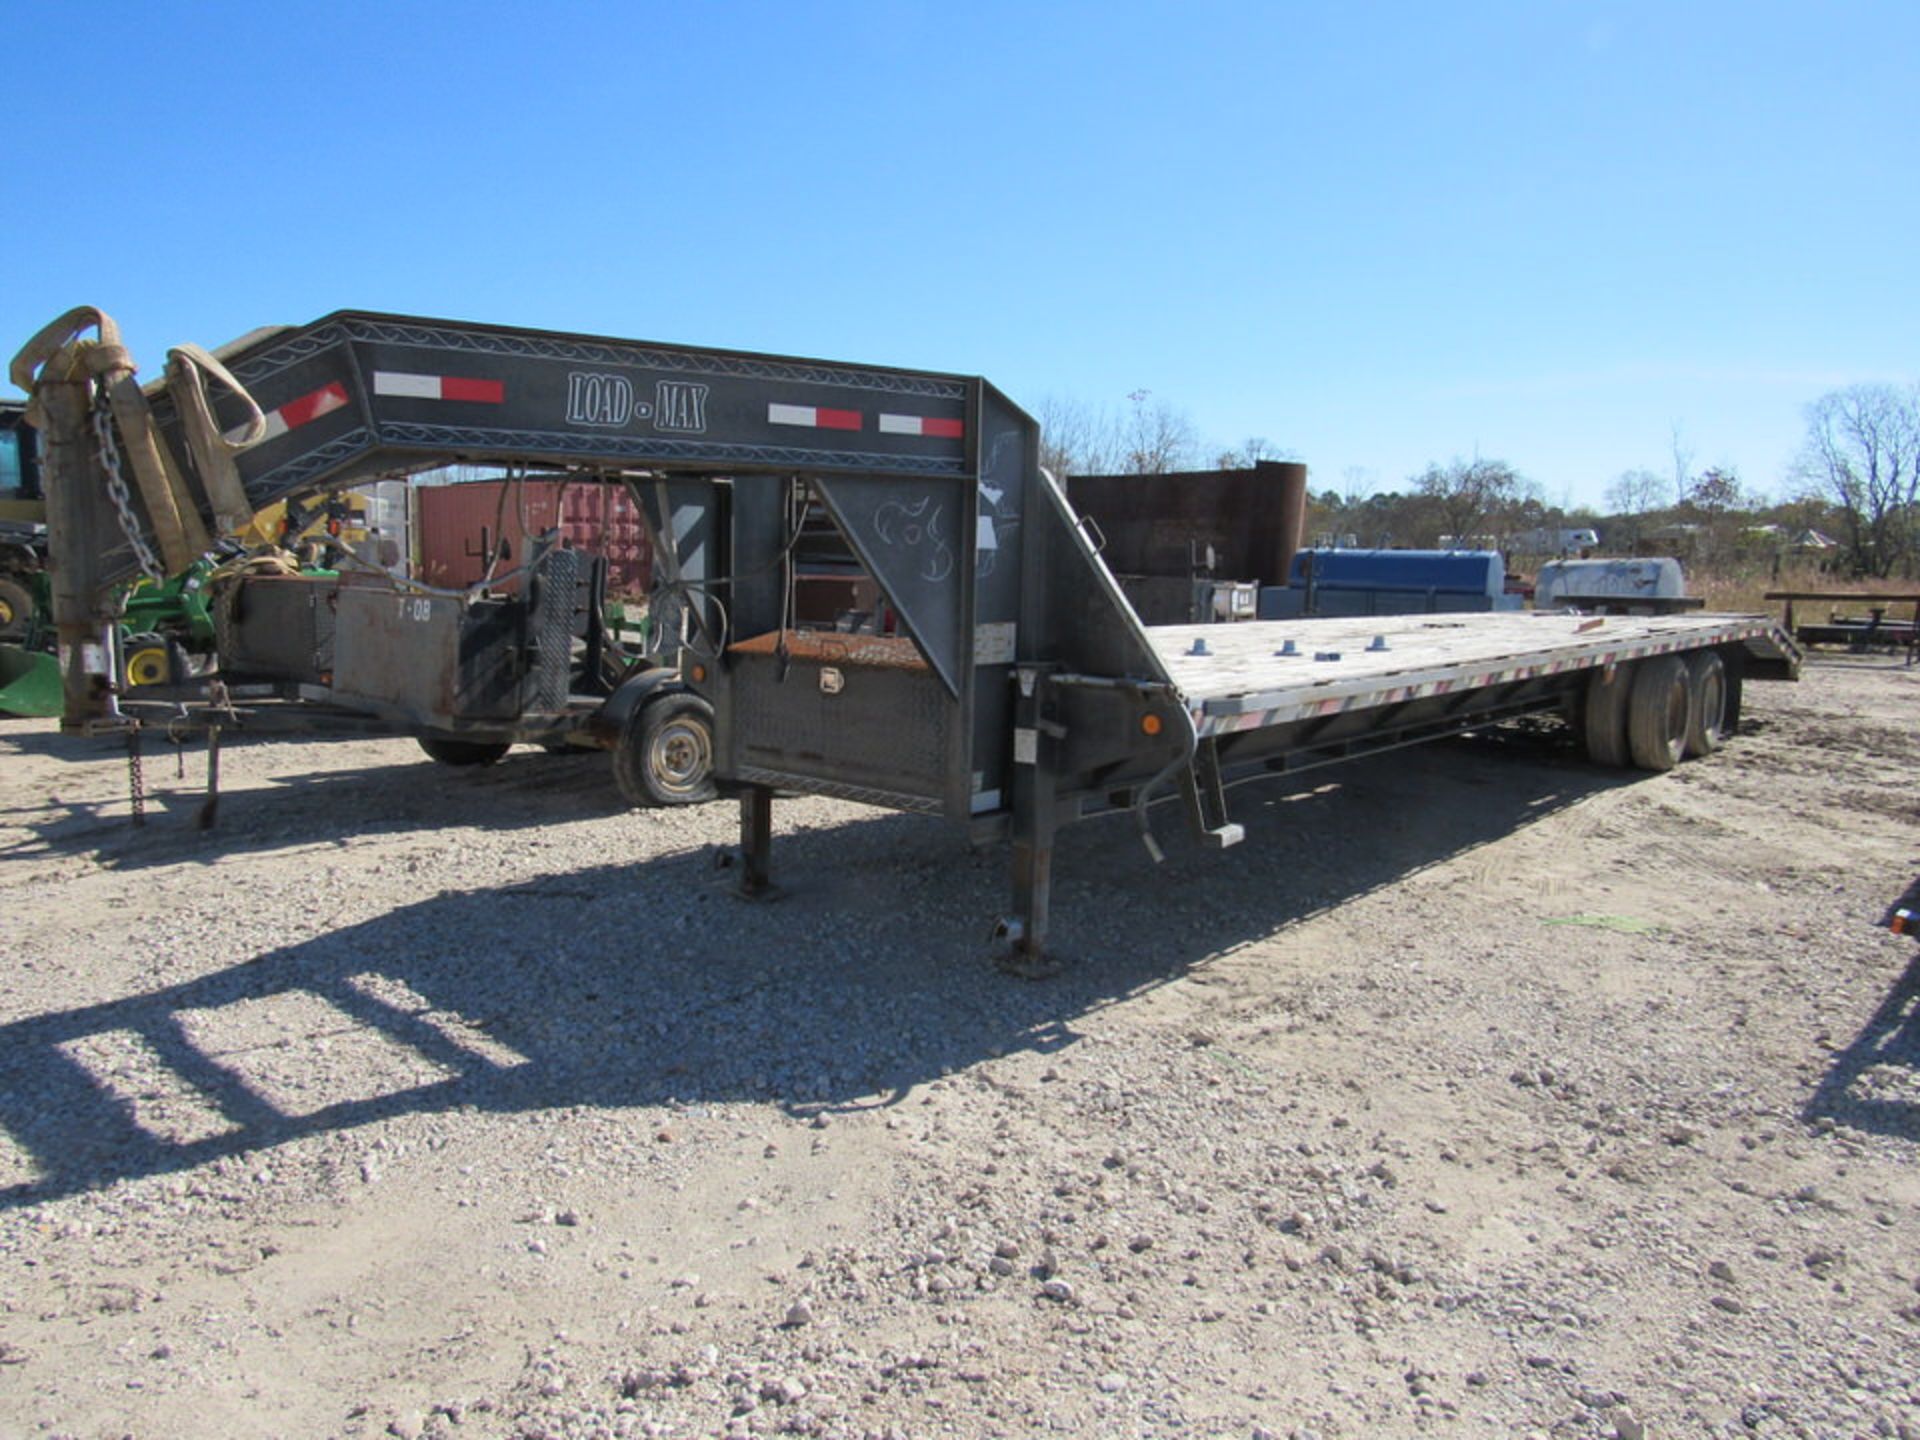 2008 LoadMax Gooseneck Trailer, 2-axle, with fold-up drive on ramps: O/A Length 43'; O/A Width 8' - Image 3 of 3